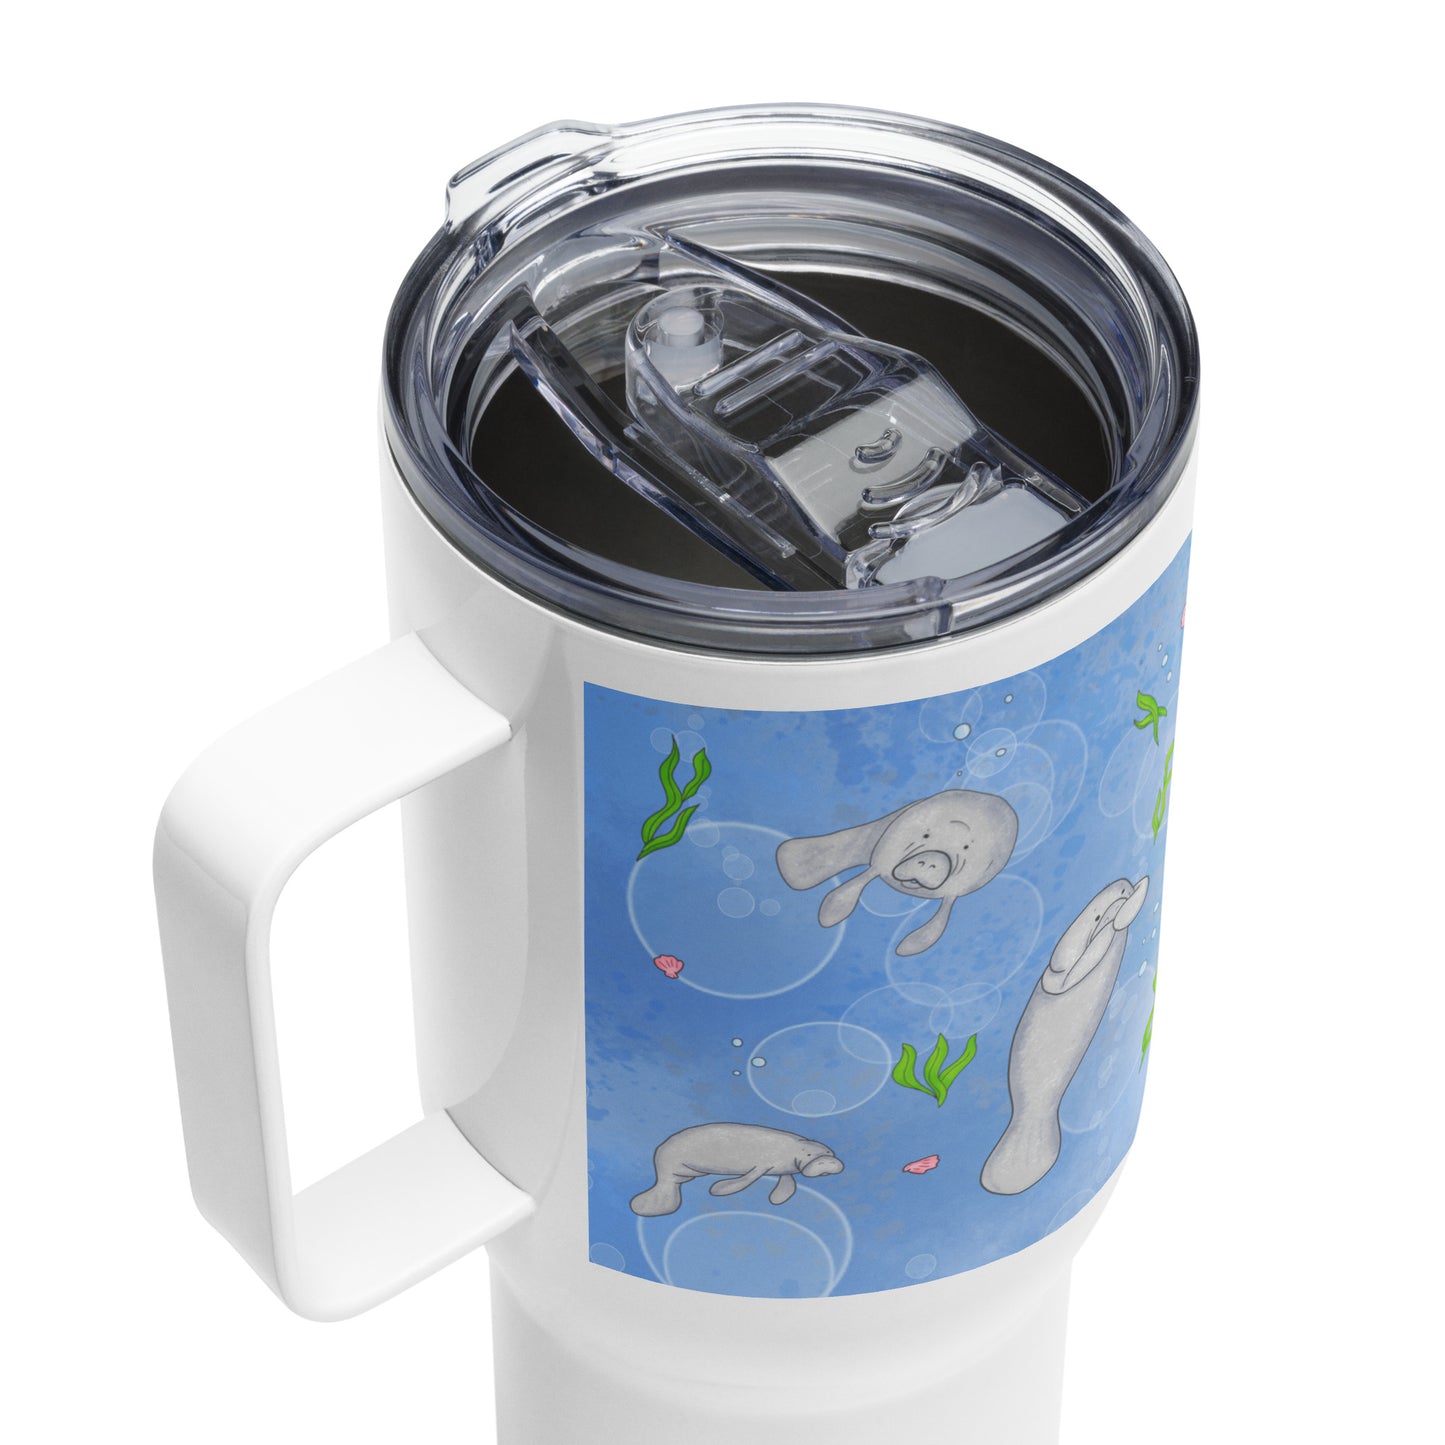 Stainless steel travel mug with handle. Holds 25 ounces of hot or cold drinks. Has wraparound illustrated manatees design. Fits most car cup holders. Comes with spill-proof BPA-free plastic lid. Detail view of lid.